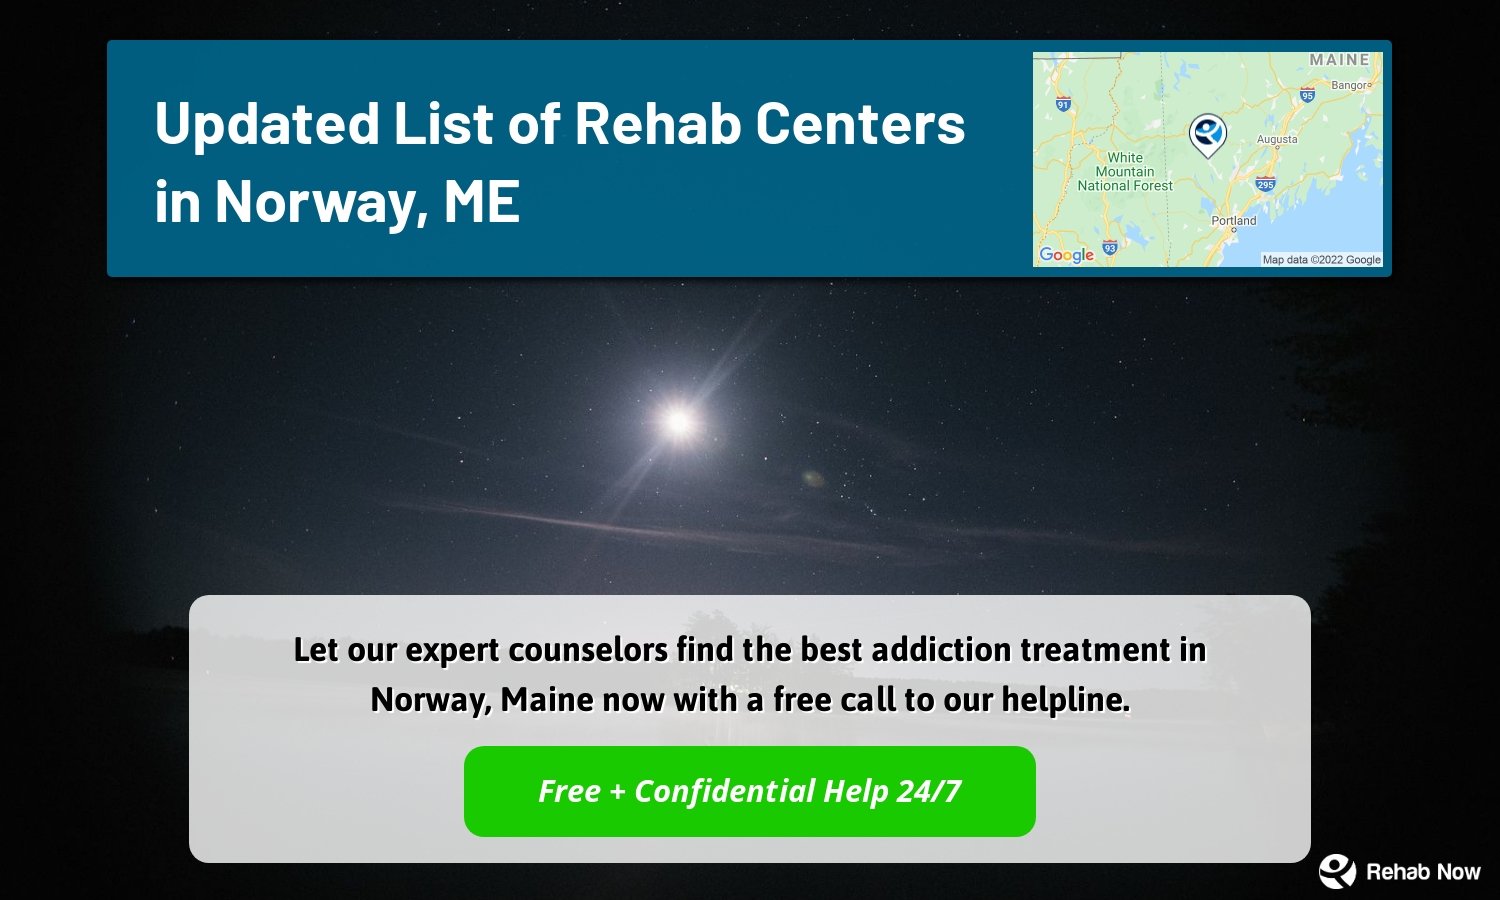 Let our expert counselors find the best addiction treatment in Norway, Maine now with a free call to our helpline.